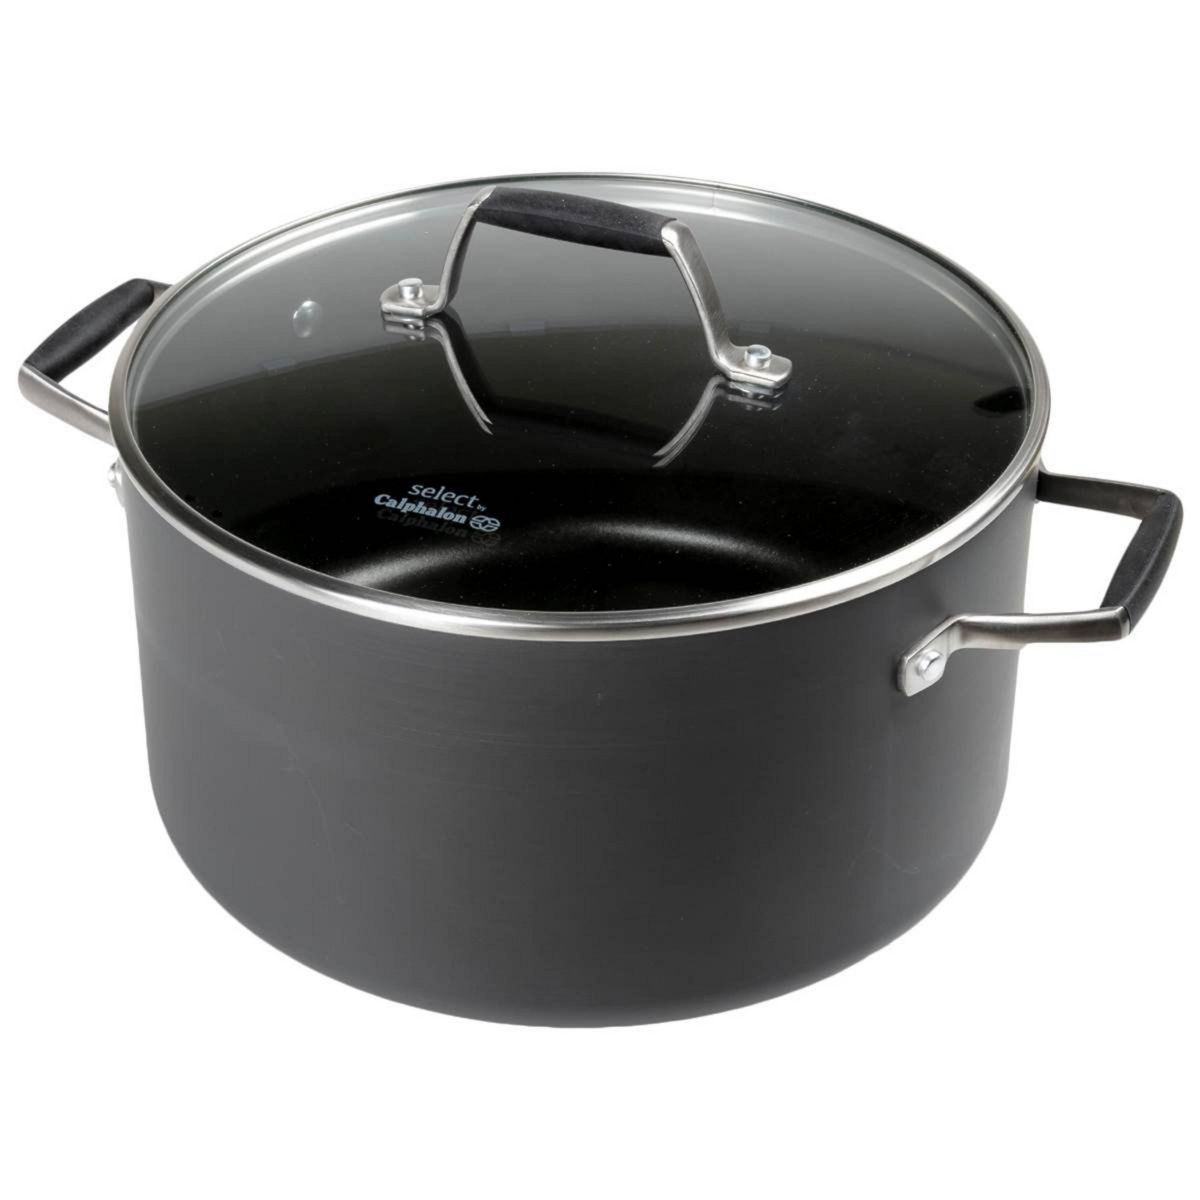 Select by Calphalon Nonstick with AquaShield 7qt Dutch Oven with Lid | Target